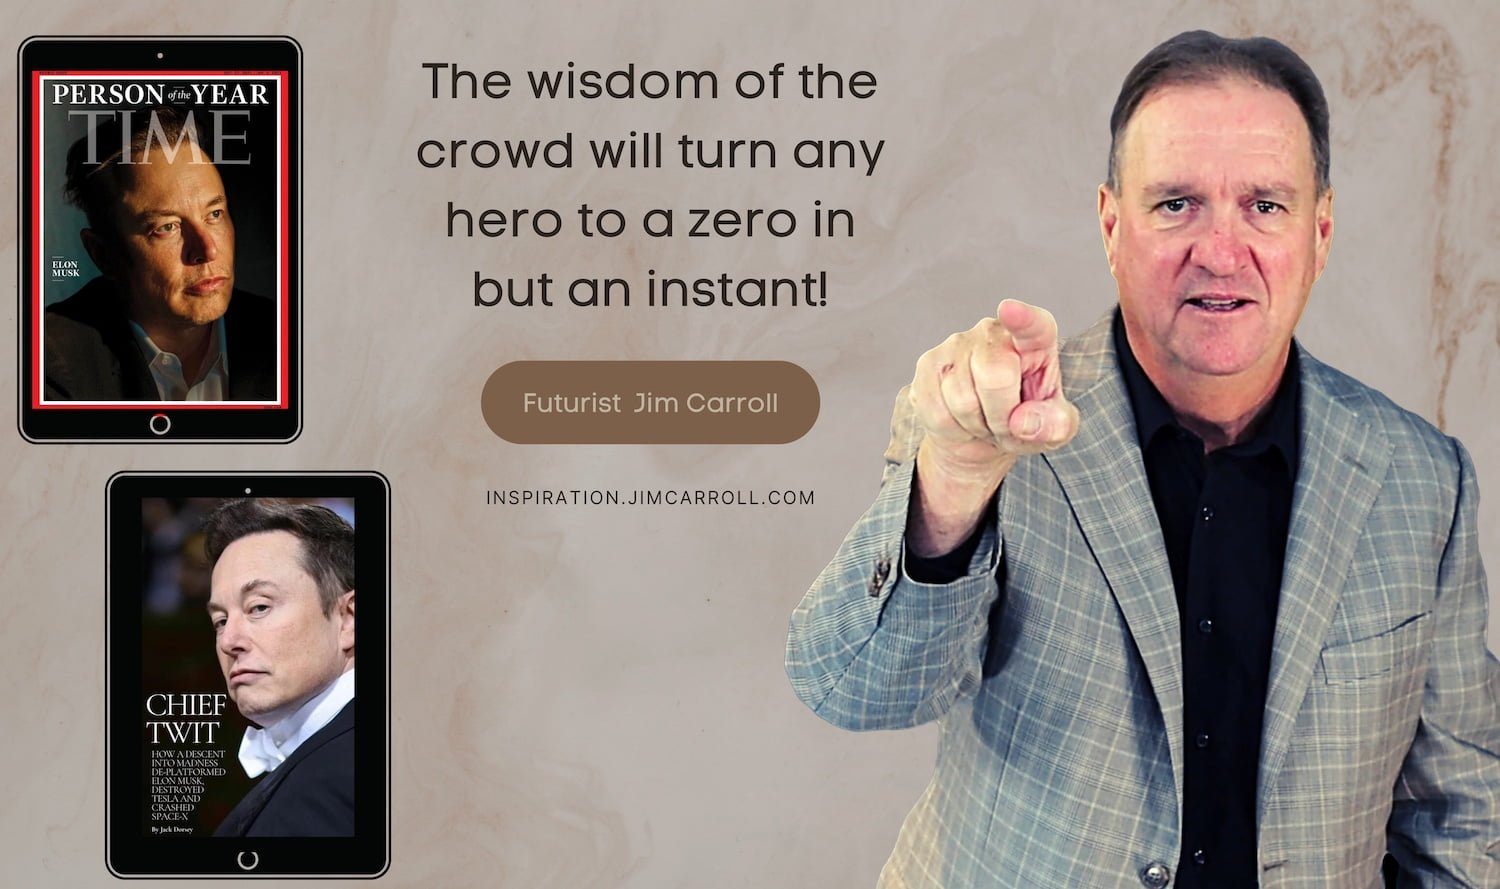 Daily Inspiration: "The wisdom of the crowd will turn any hero to a zero in but an instant!"